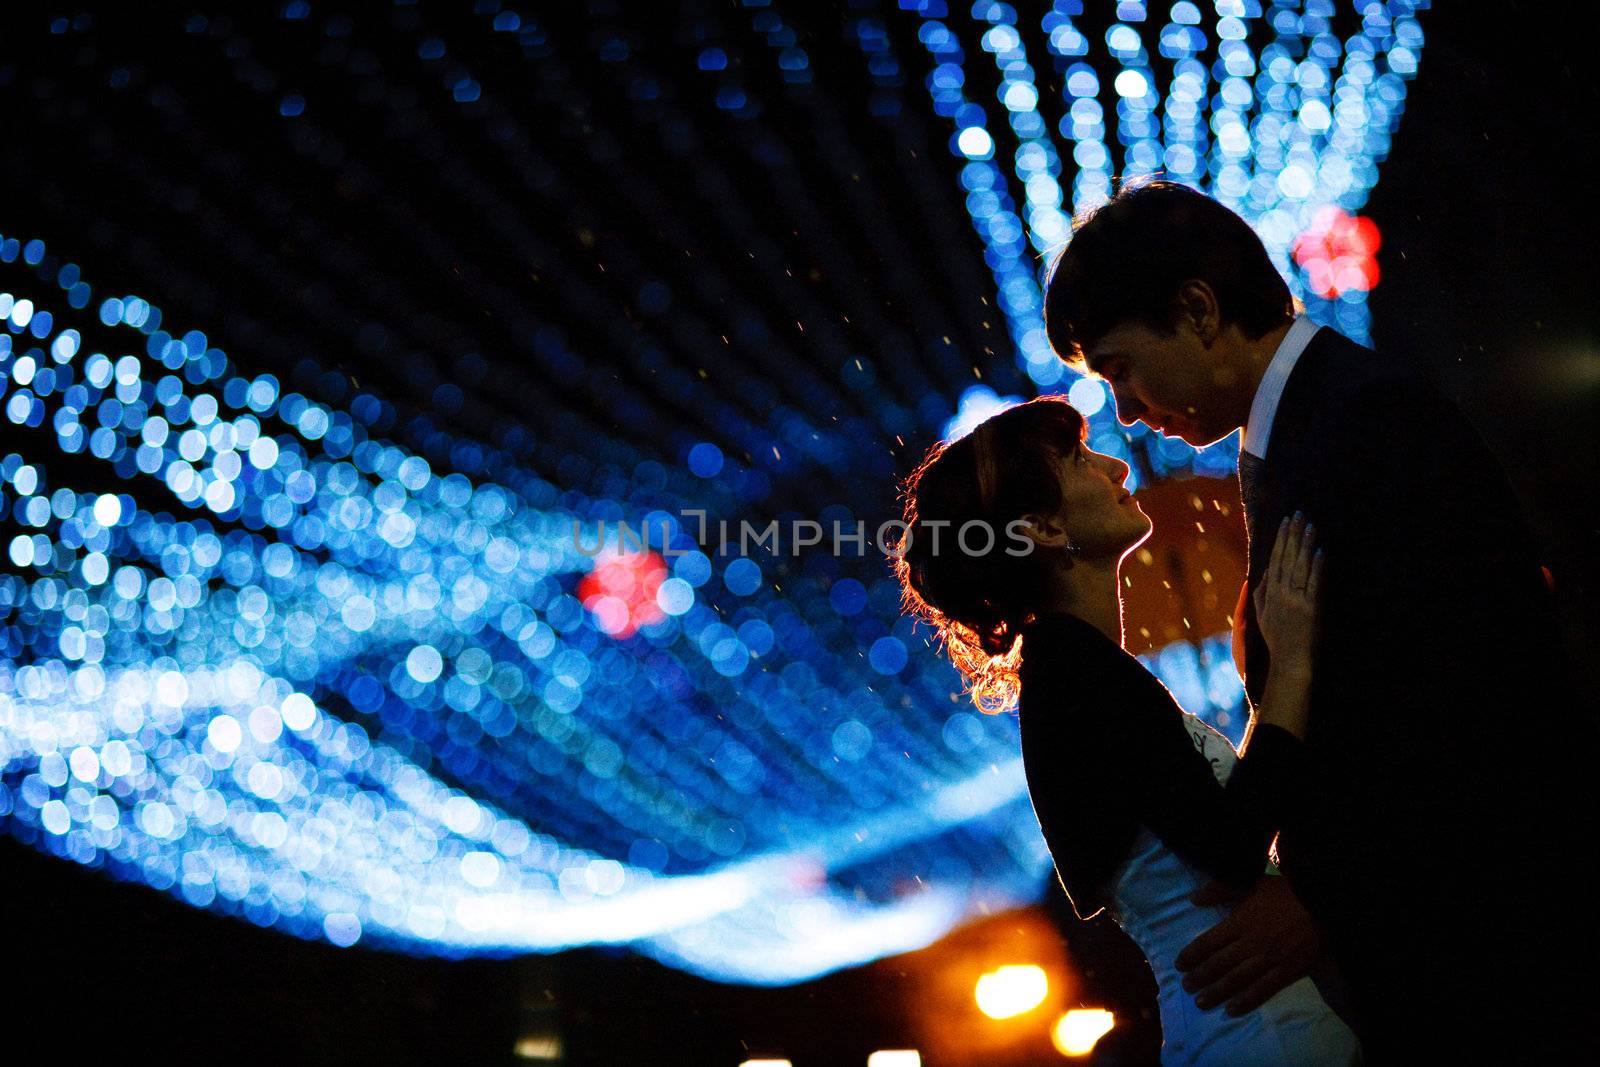 couple at night by vsurkov